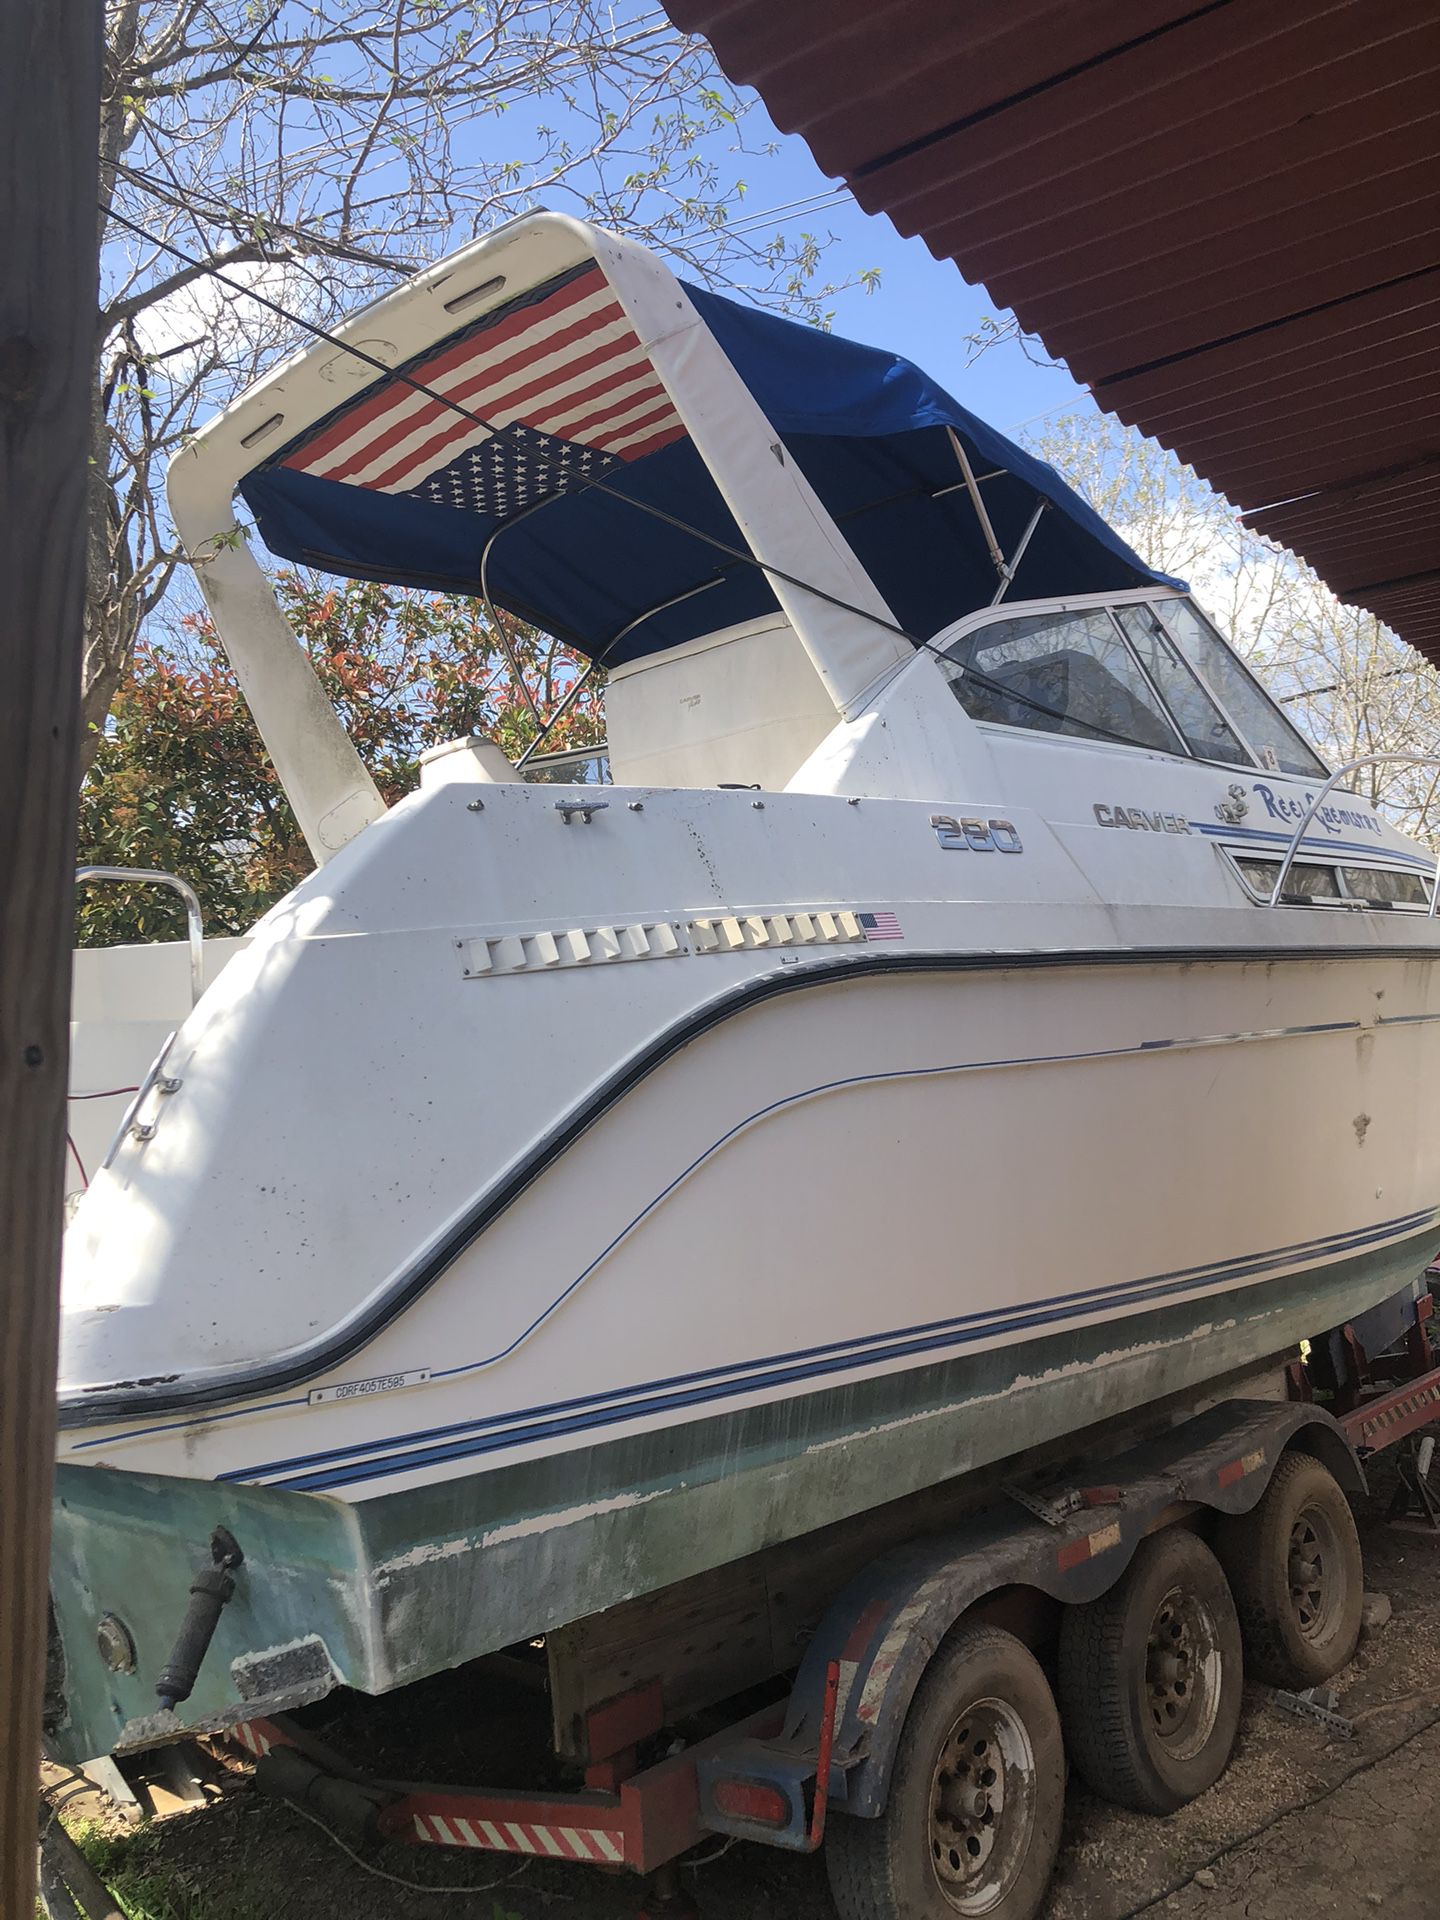 1995 Carver 280 Yacht/Boat with 3 axle trailer 